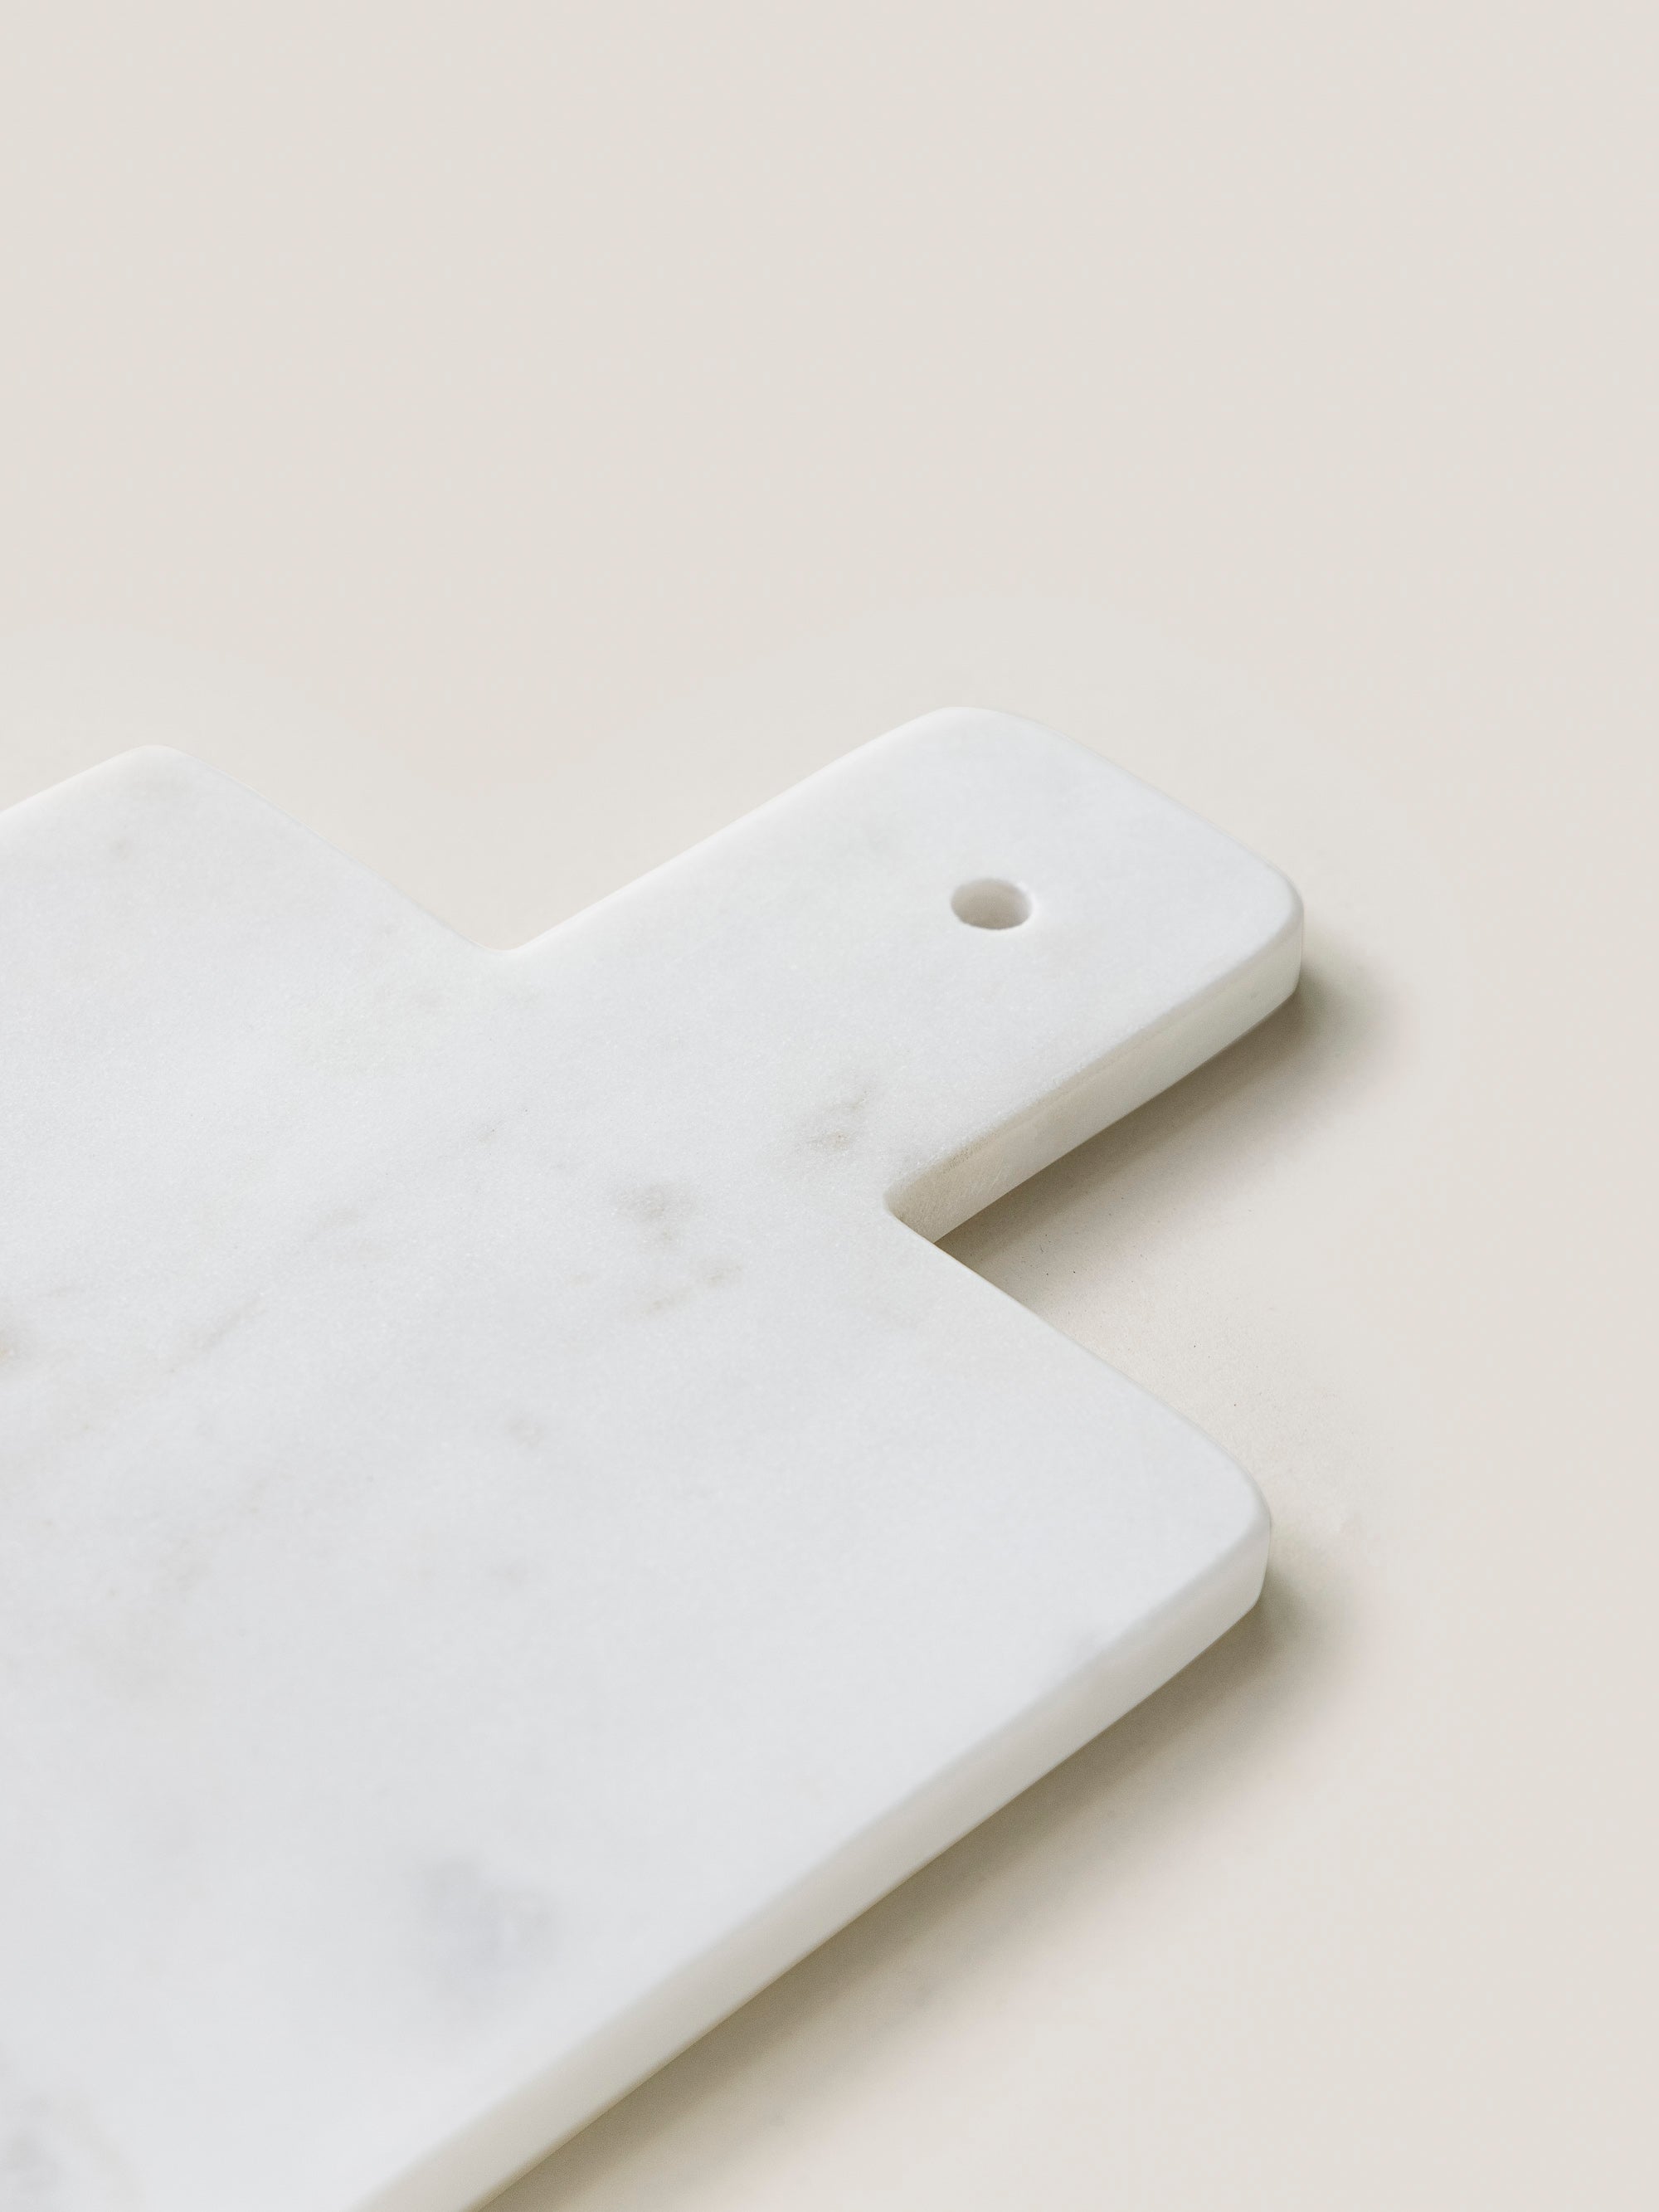 Serving Plate/Cutting Board - White Marble